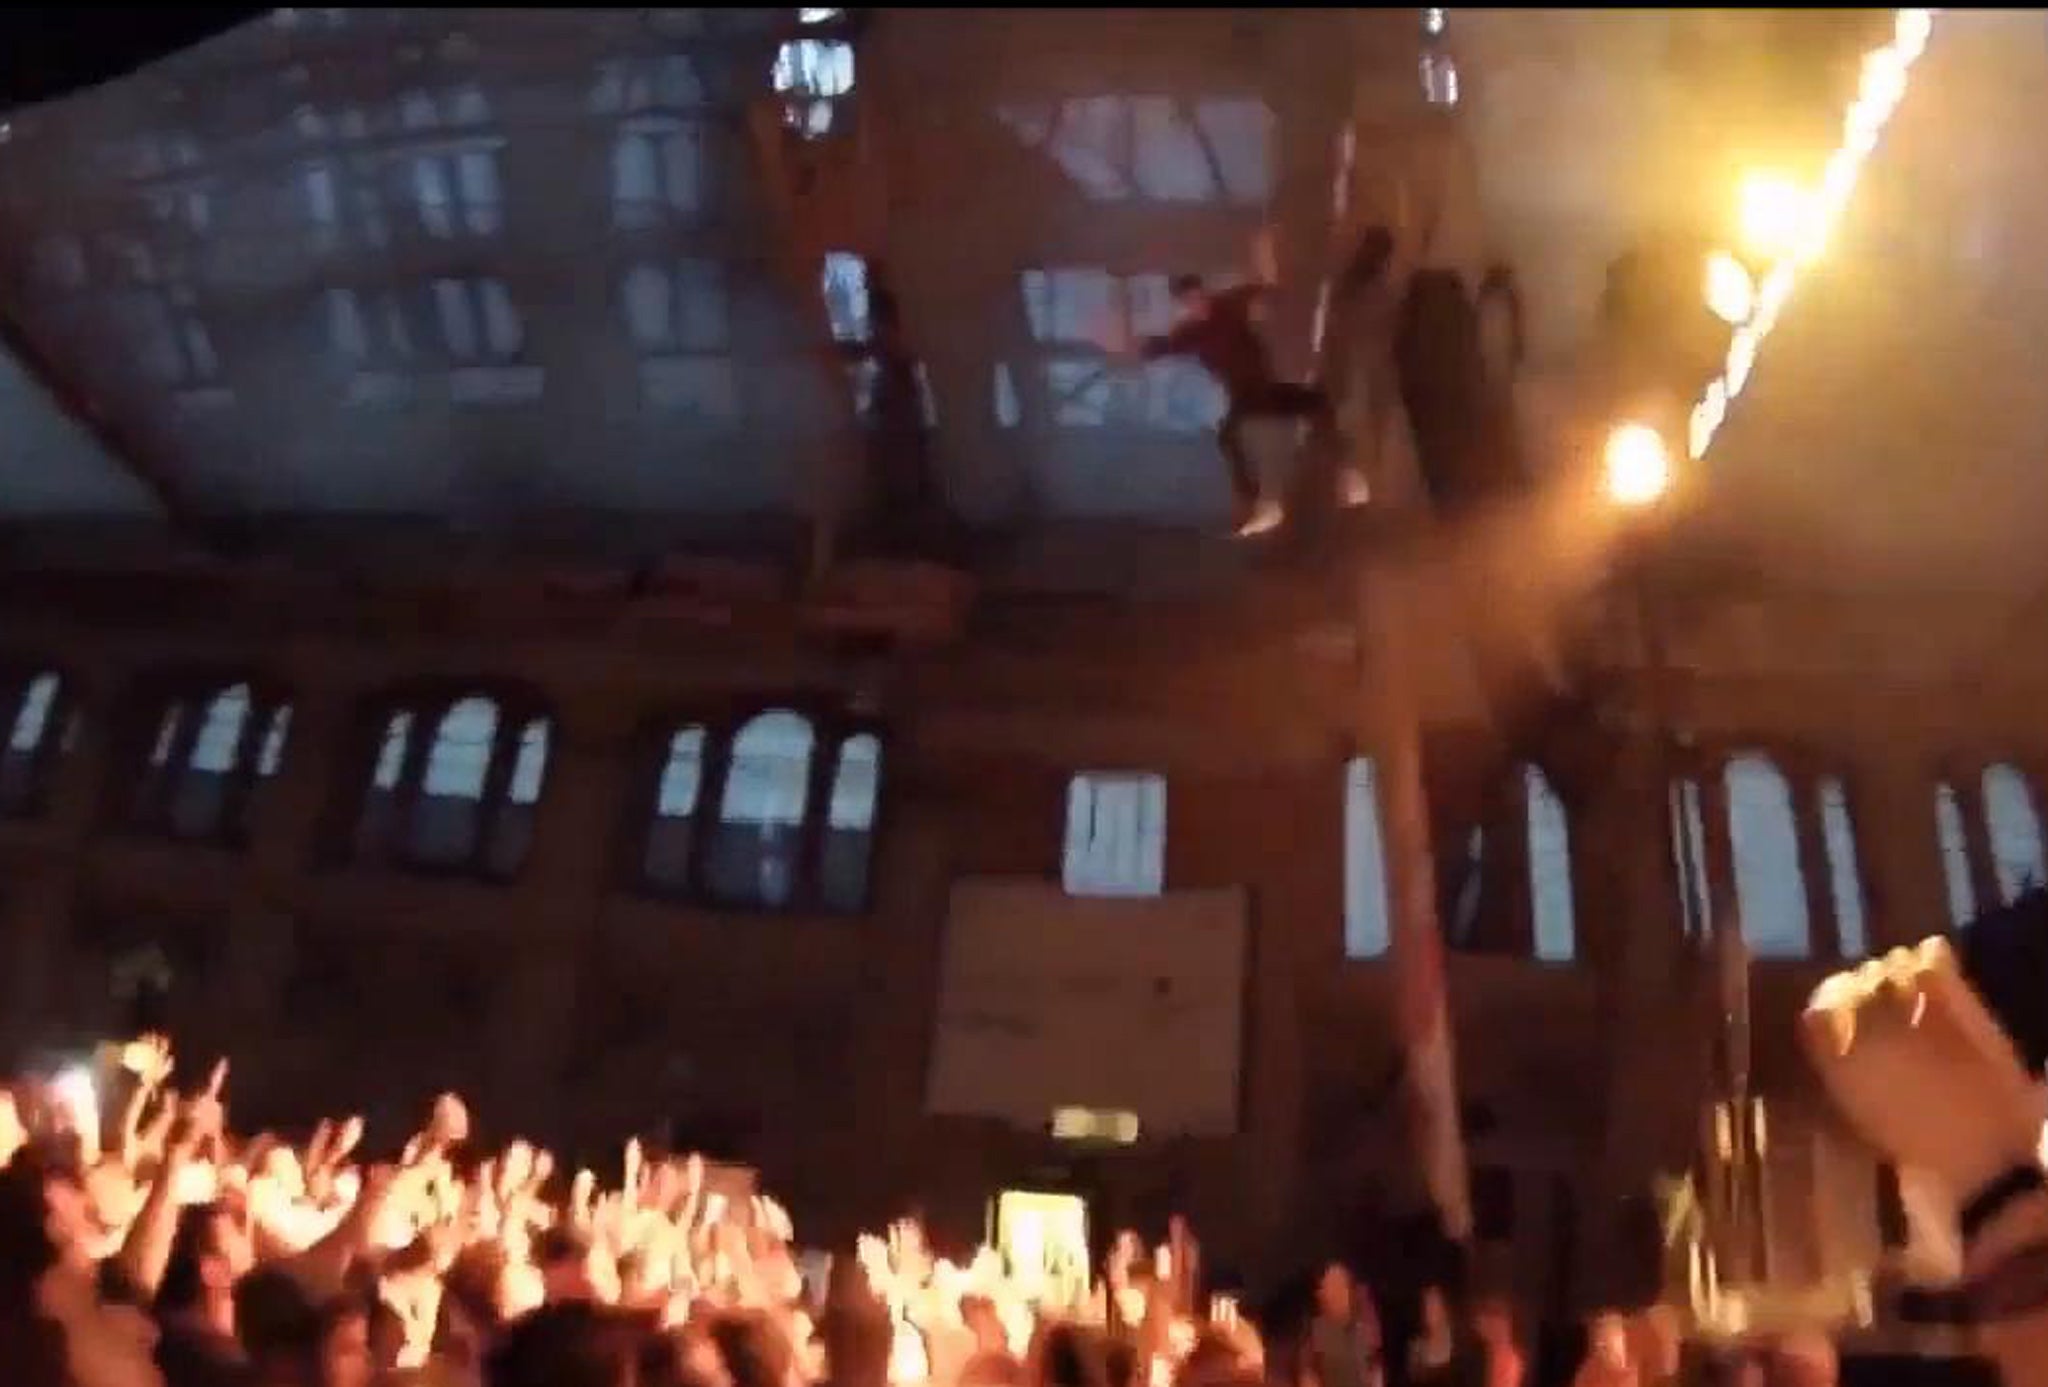 Rapper George Watsky jumps from the stage in Alexandra Palace, London